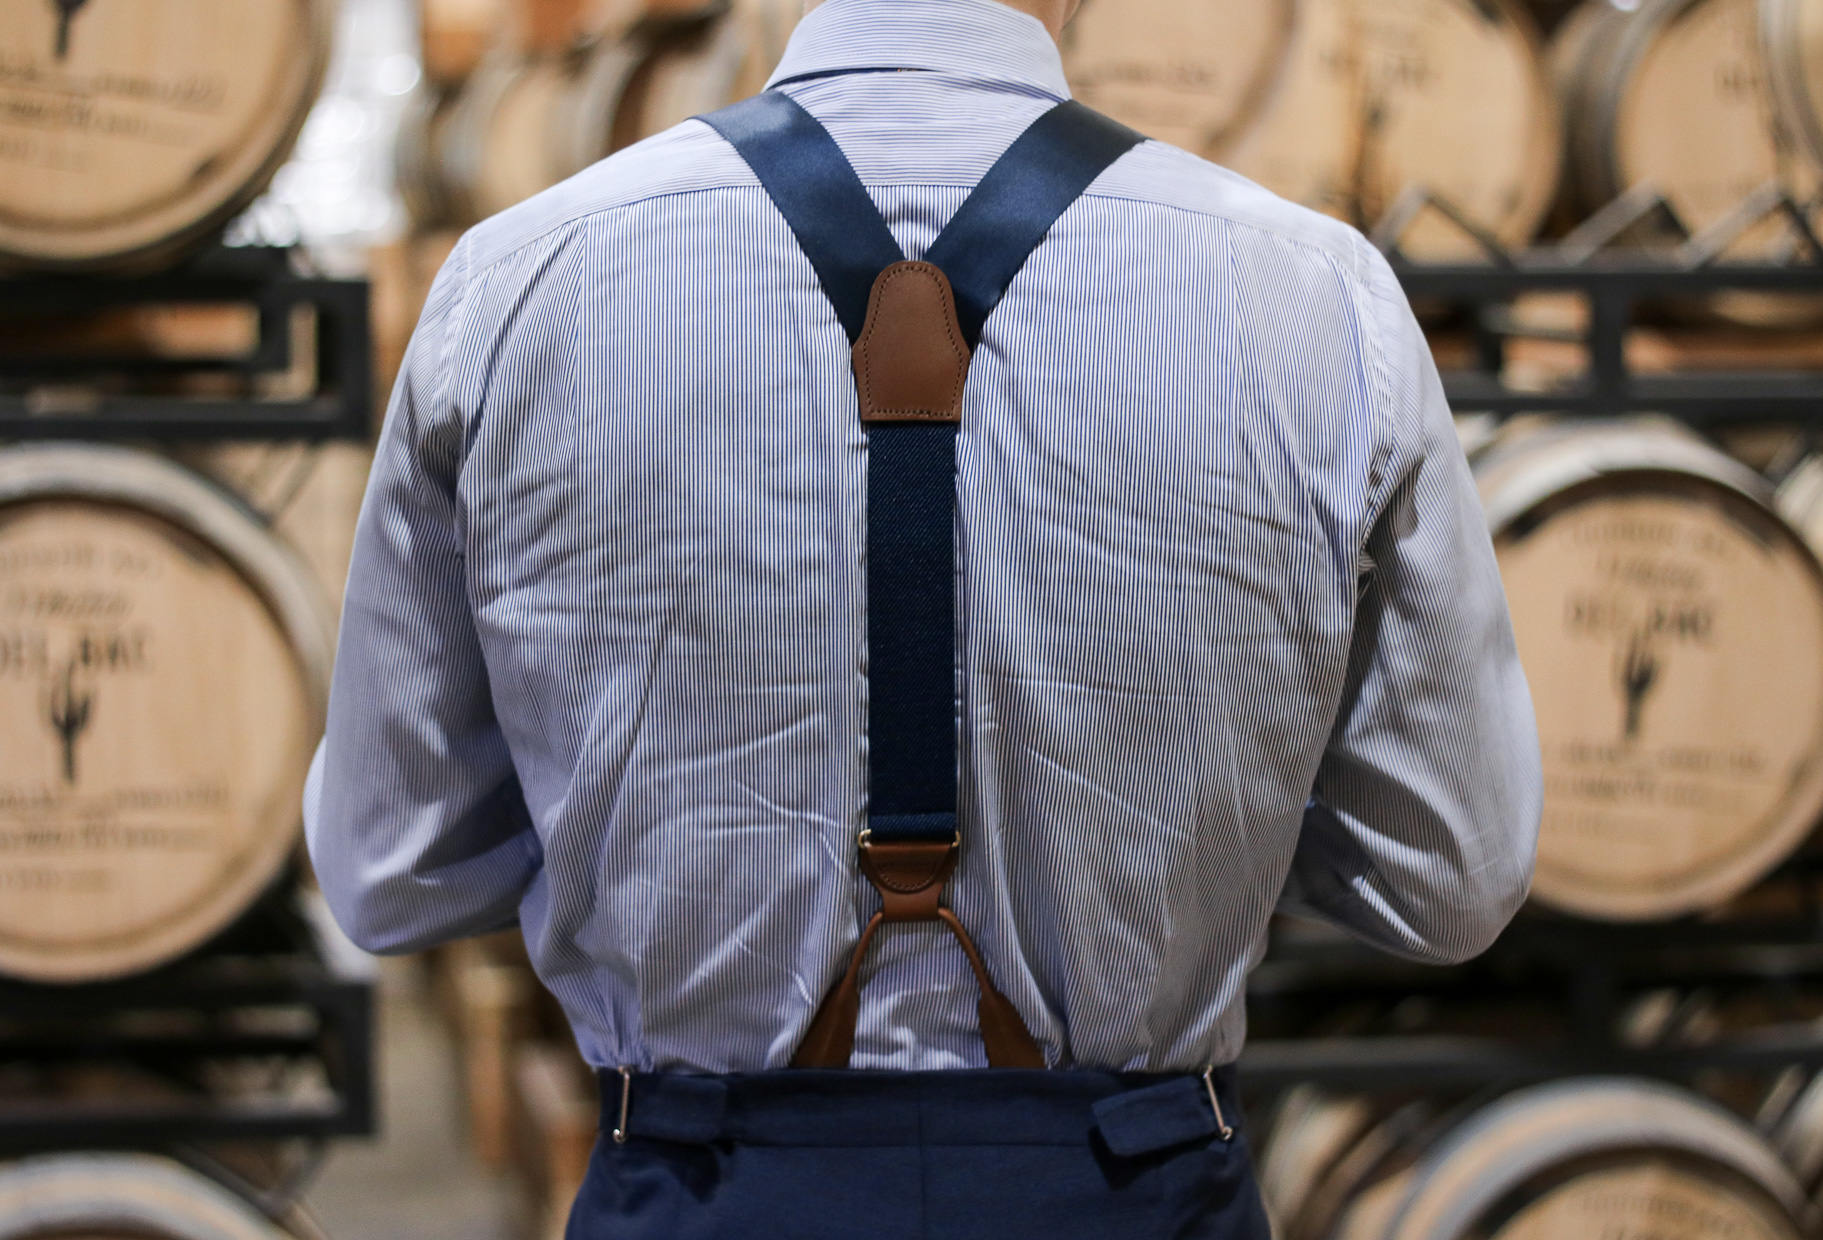 How To Wear Suspenders: Everything To Know